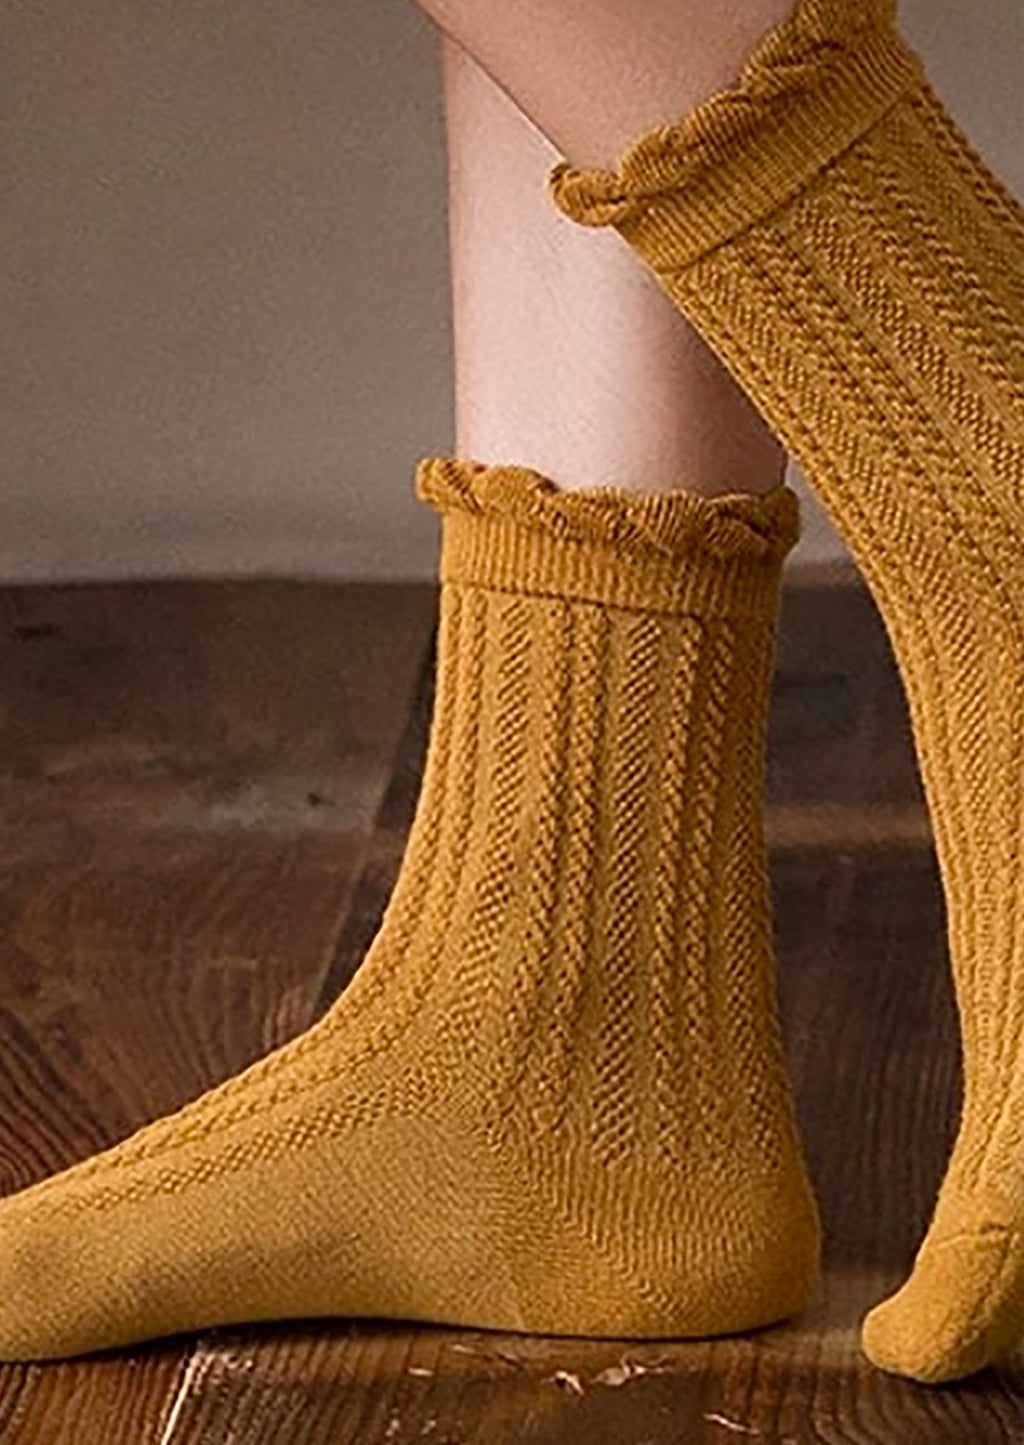 4: A pair of feet wearing cable knit socks that hit above the ankle.